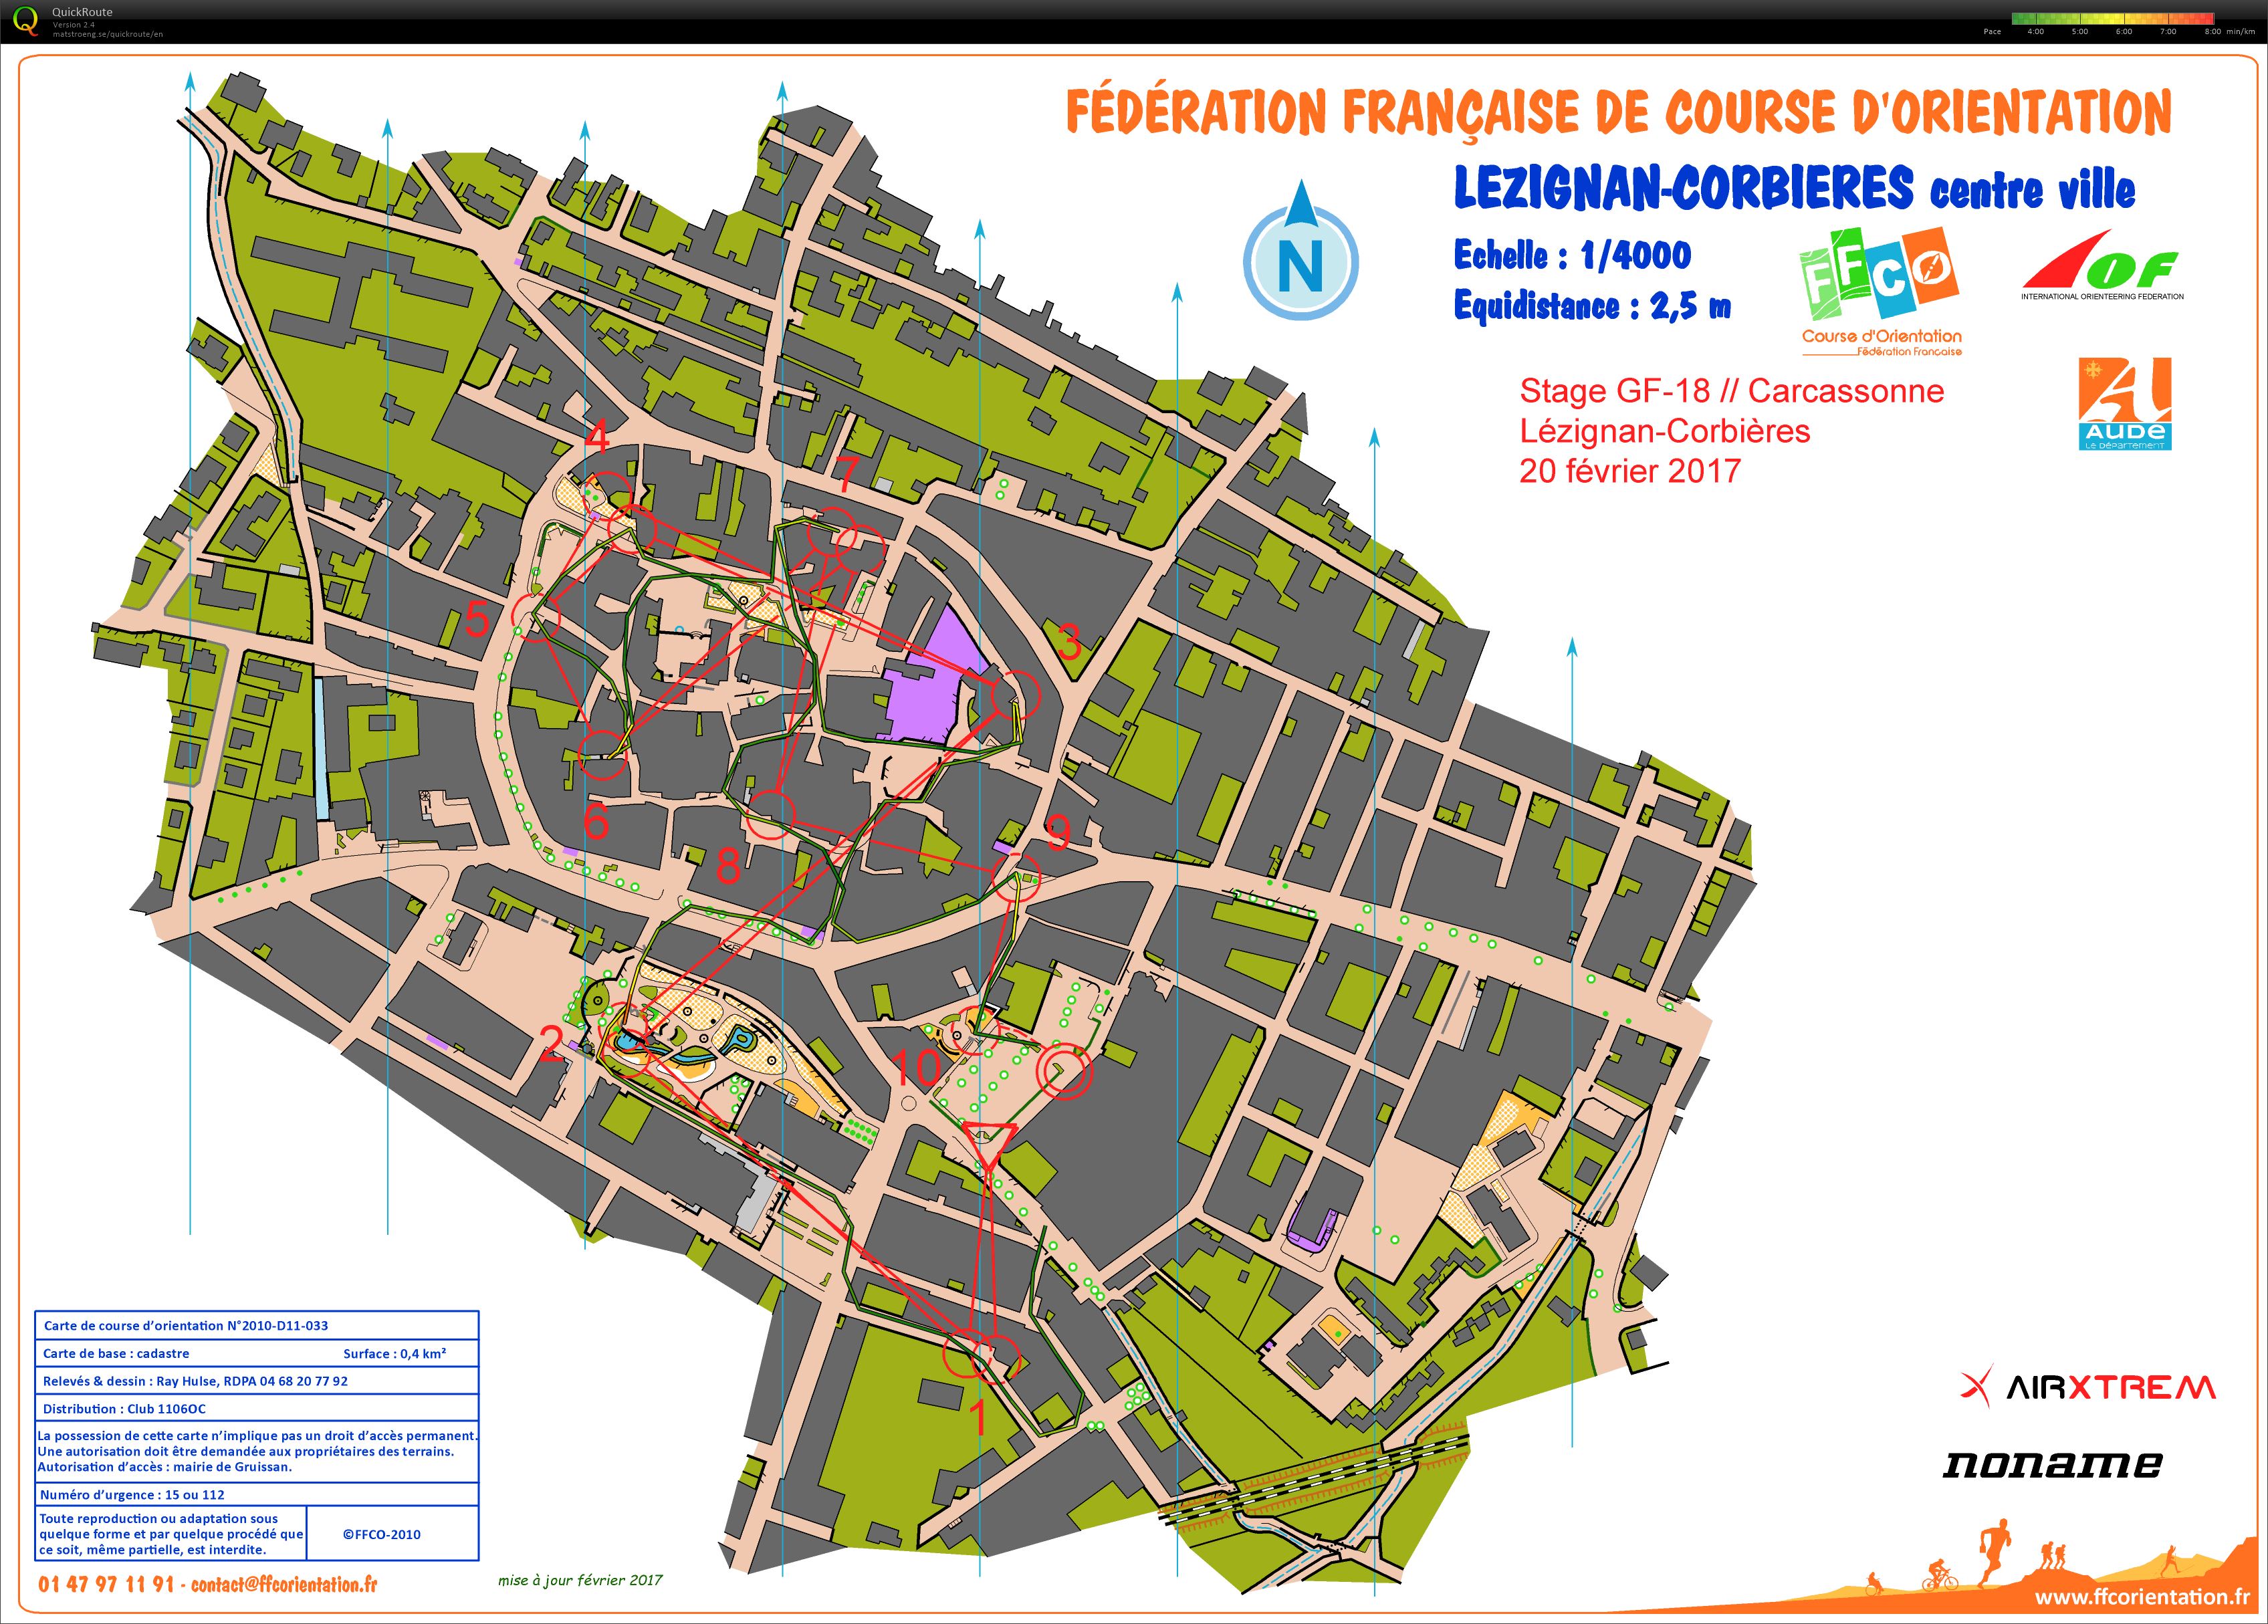 Manche 1 (chasse) relais sprint stage gf-18 Carcassonne (2017-02-20)